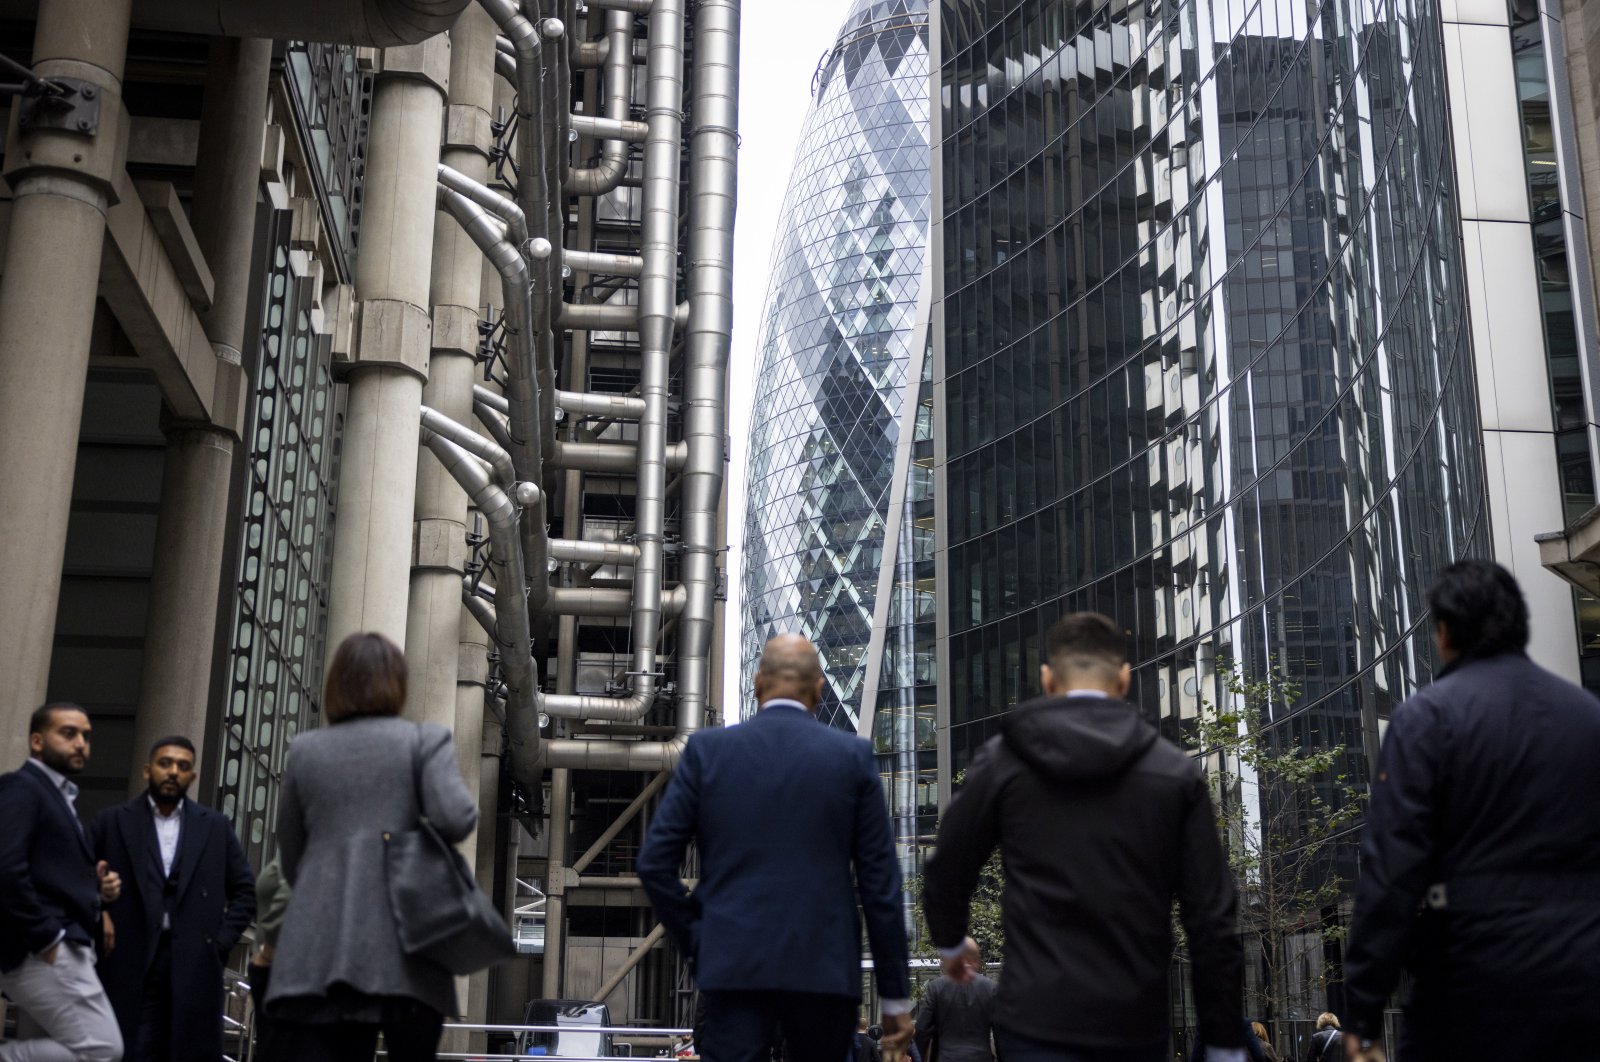 People walking around the business headquarters in the City of London, U.K., Oct. 12, 2022. (EPA Photo)